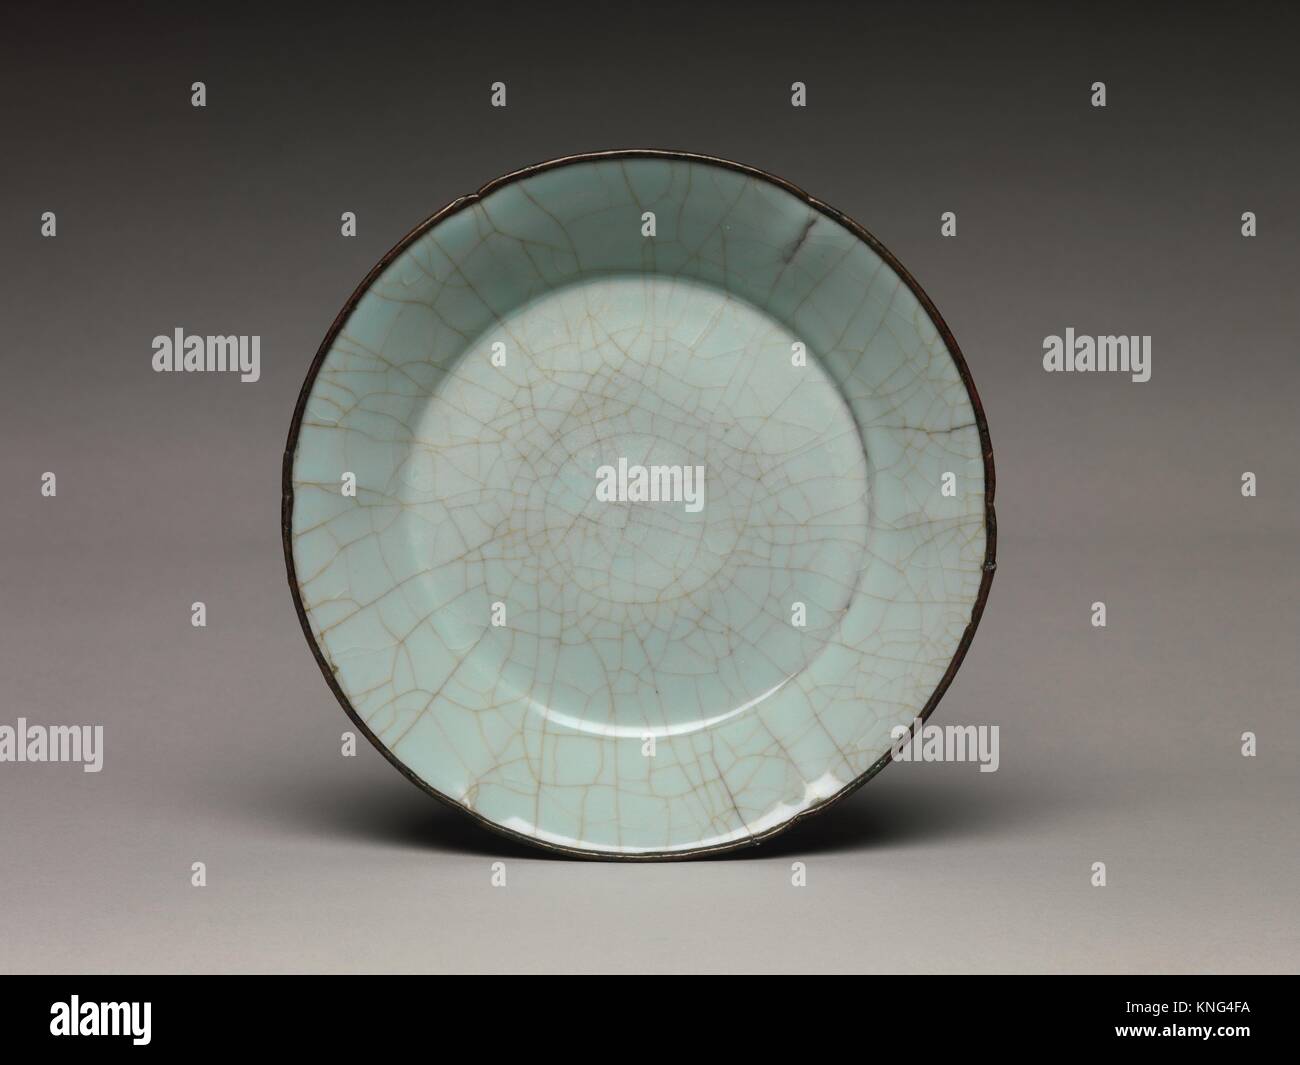 Dish. Period: Southern Song dynasty (1127-1279); Date: late 12th-13th century; Culture: China; Medium: Stoneware with crackled blue glaze (Guan Stock Photo